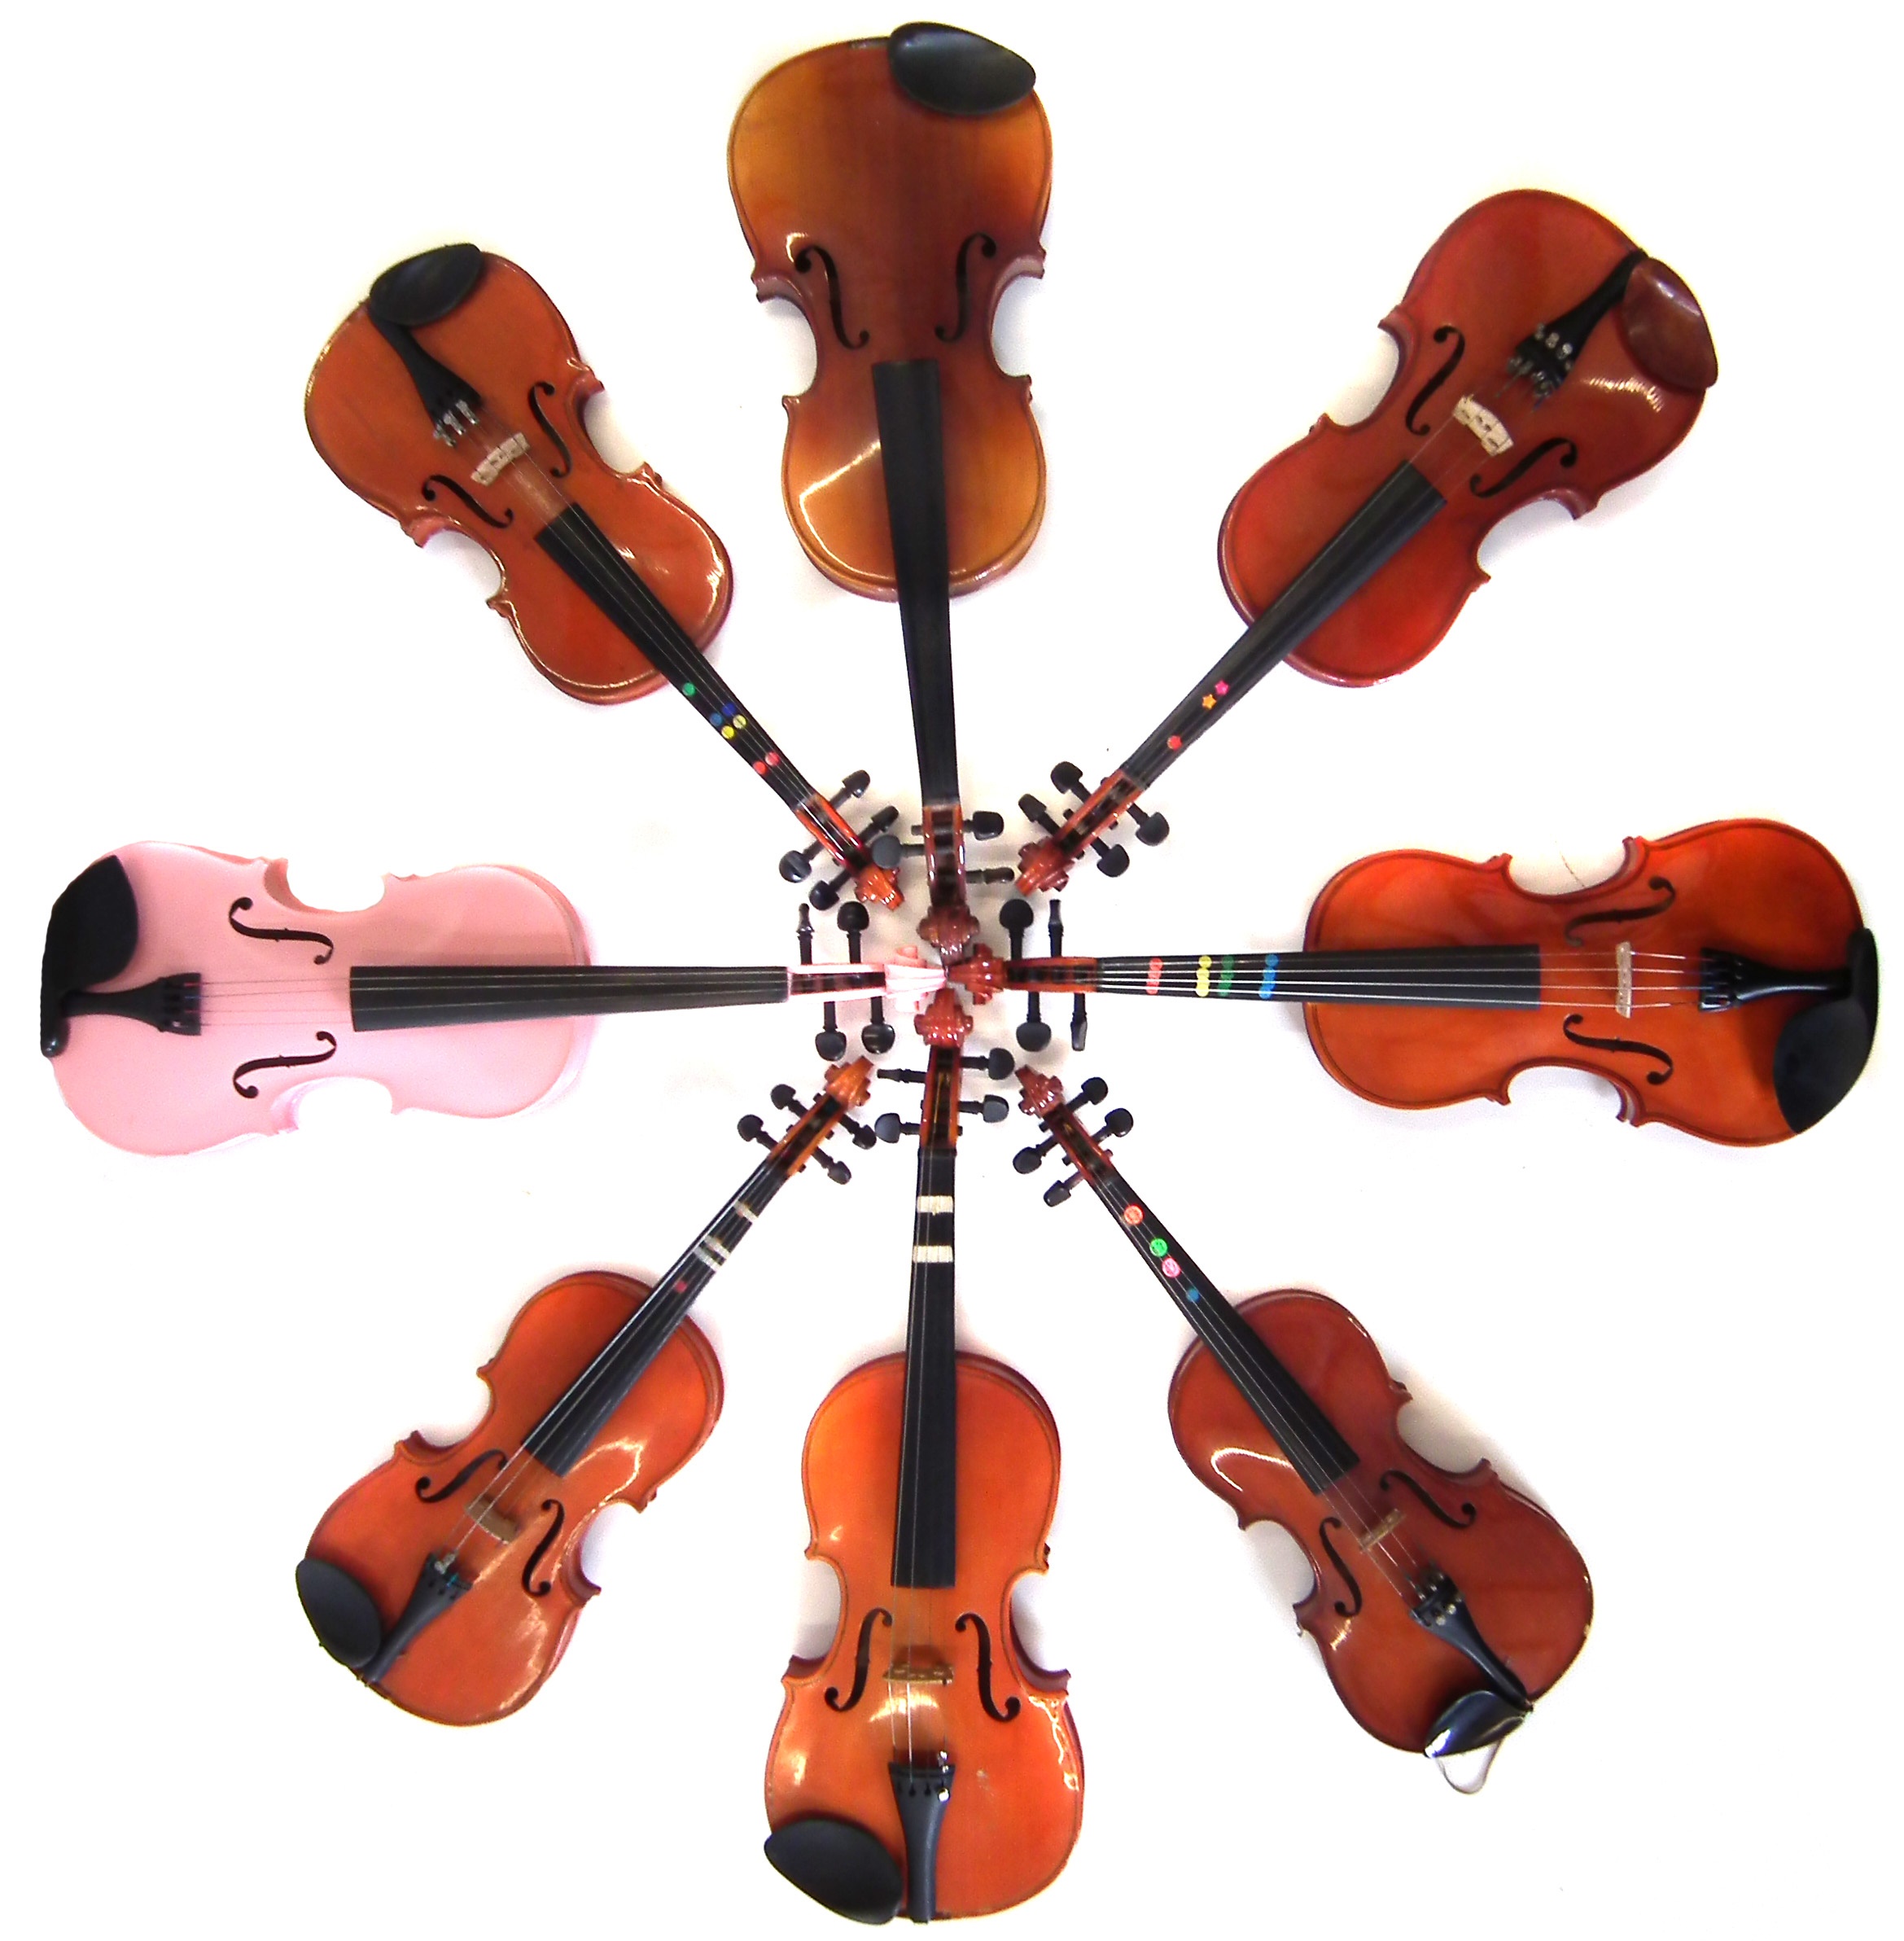 Eight violins in cases